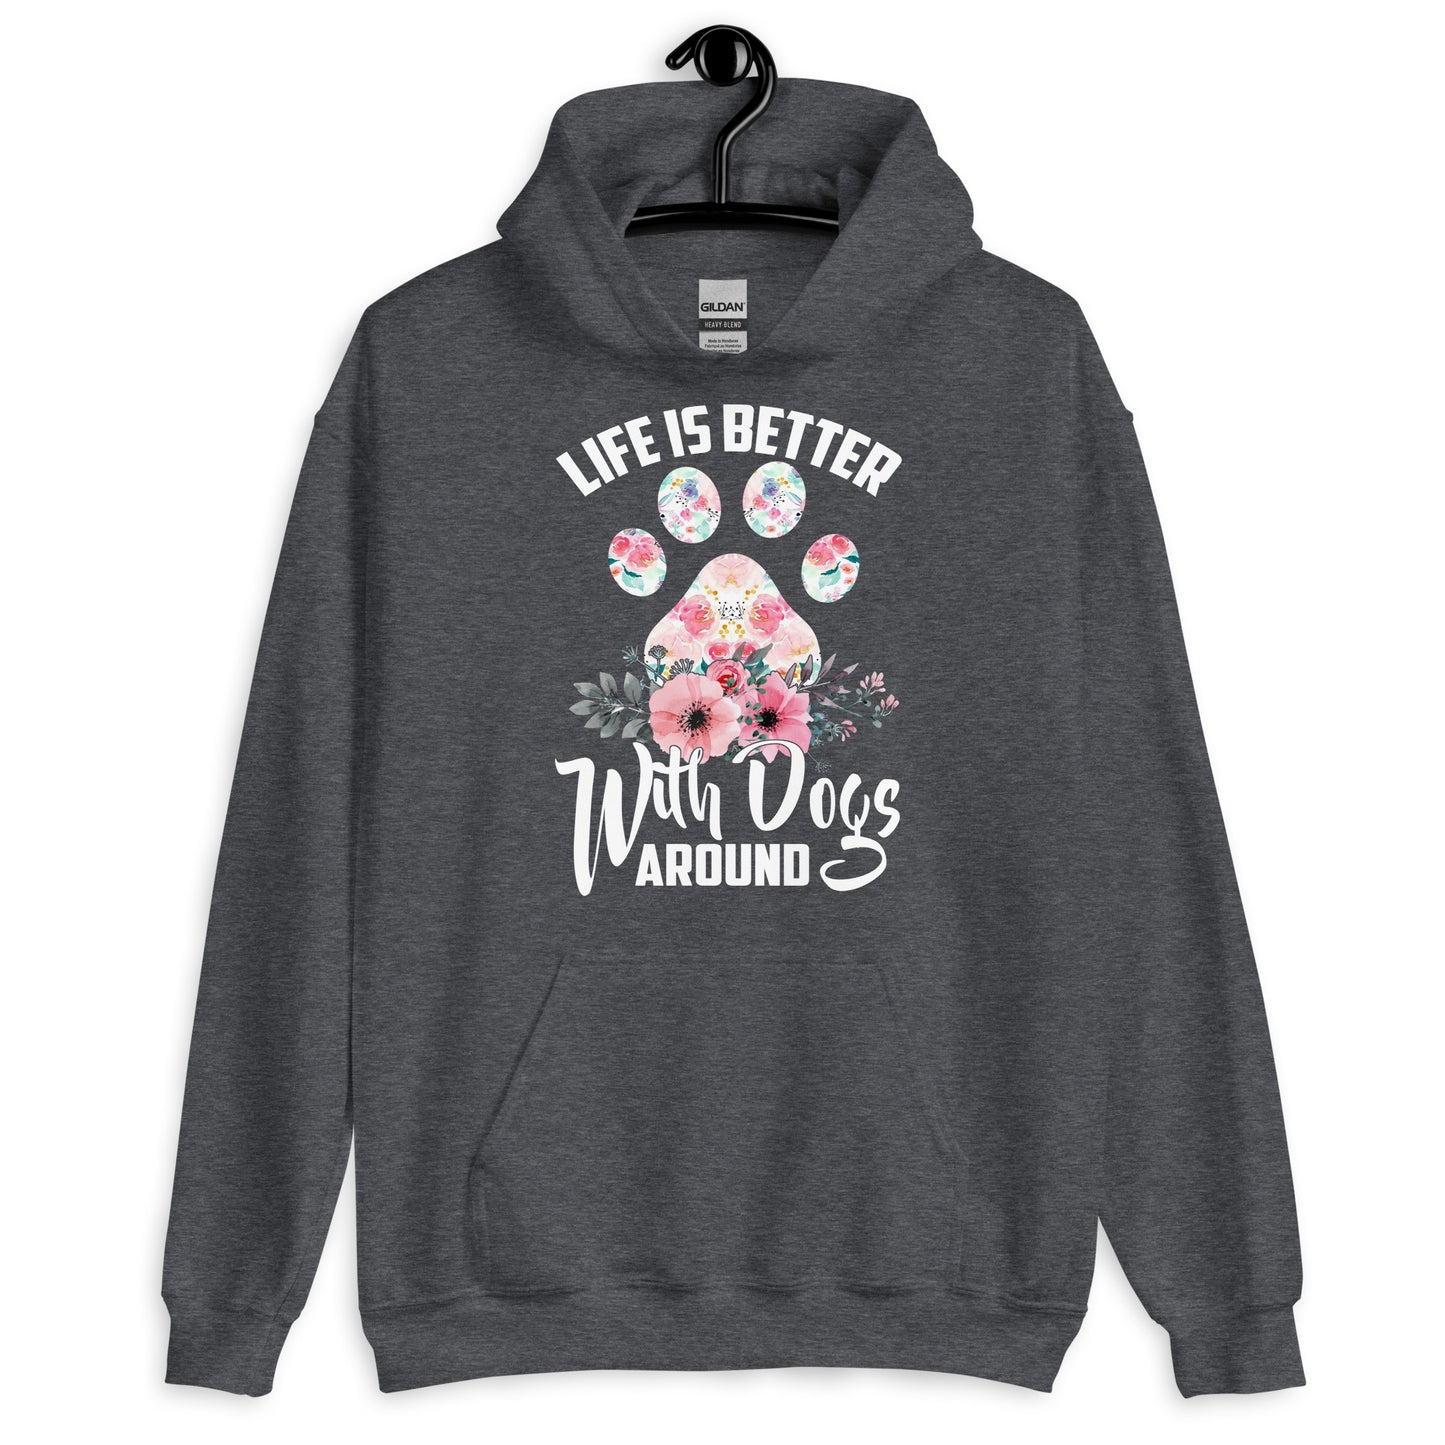 Life is Better with Dogs Around Hoodie